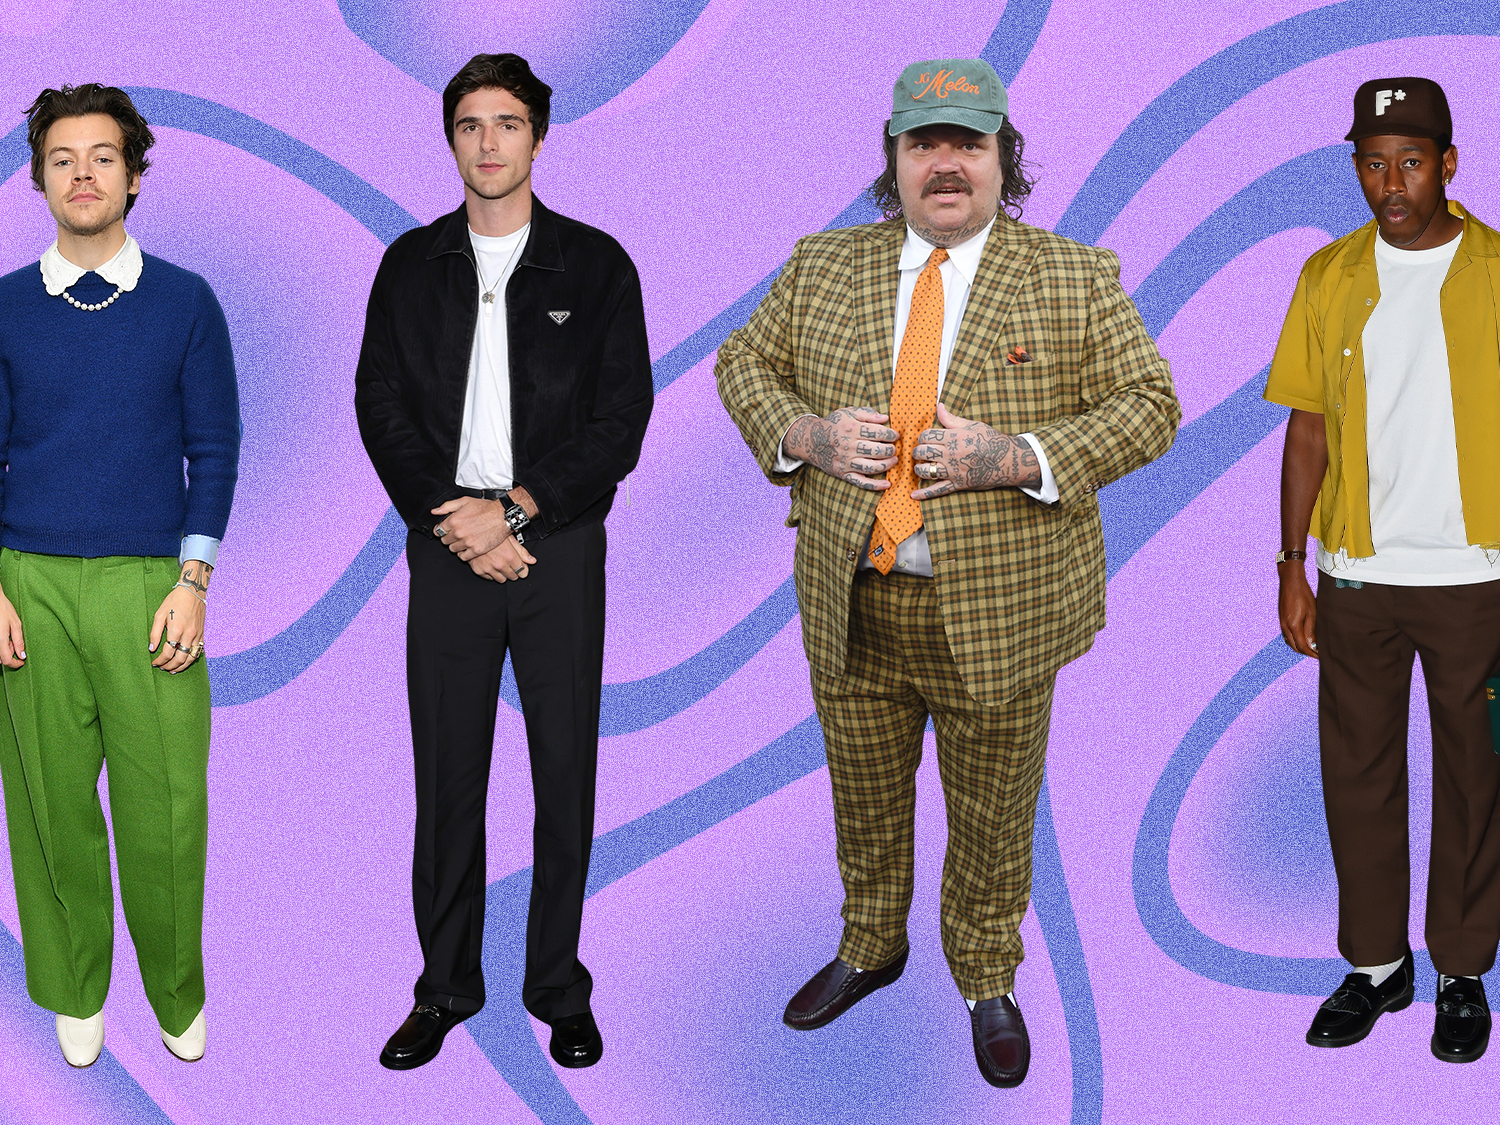 19 Objectively Correct Reasons to Buy Some Dress Pants Right Now